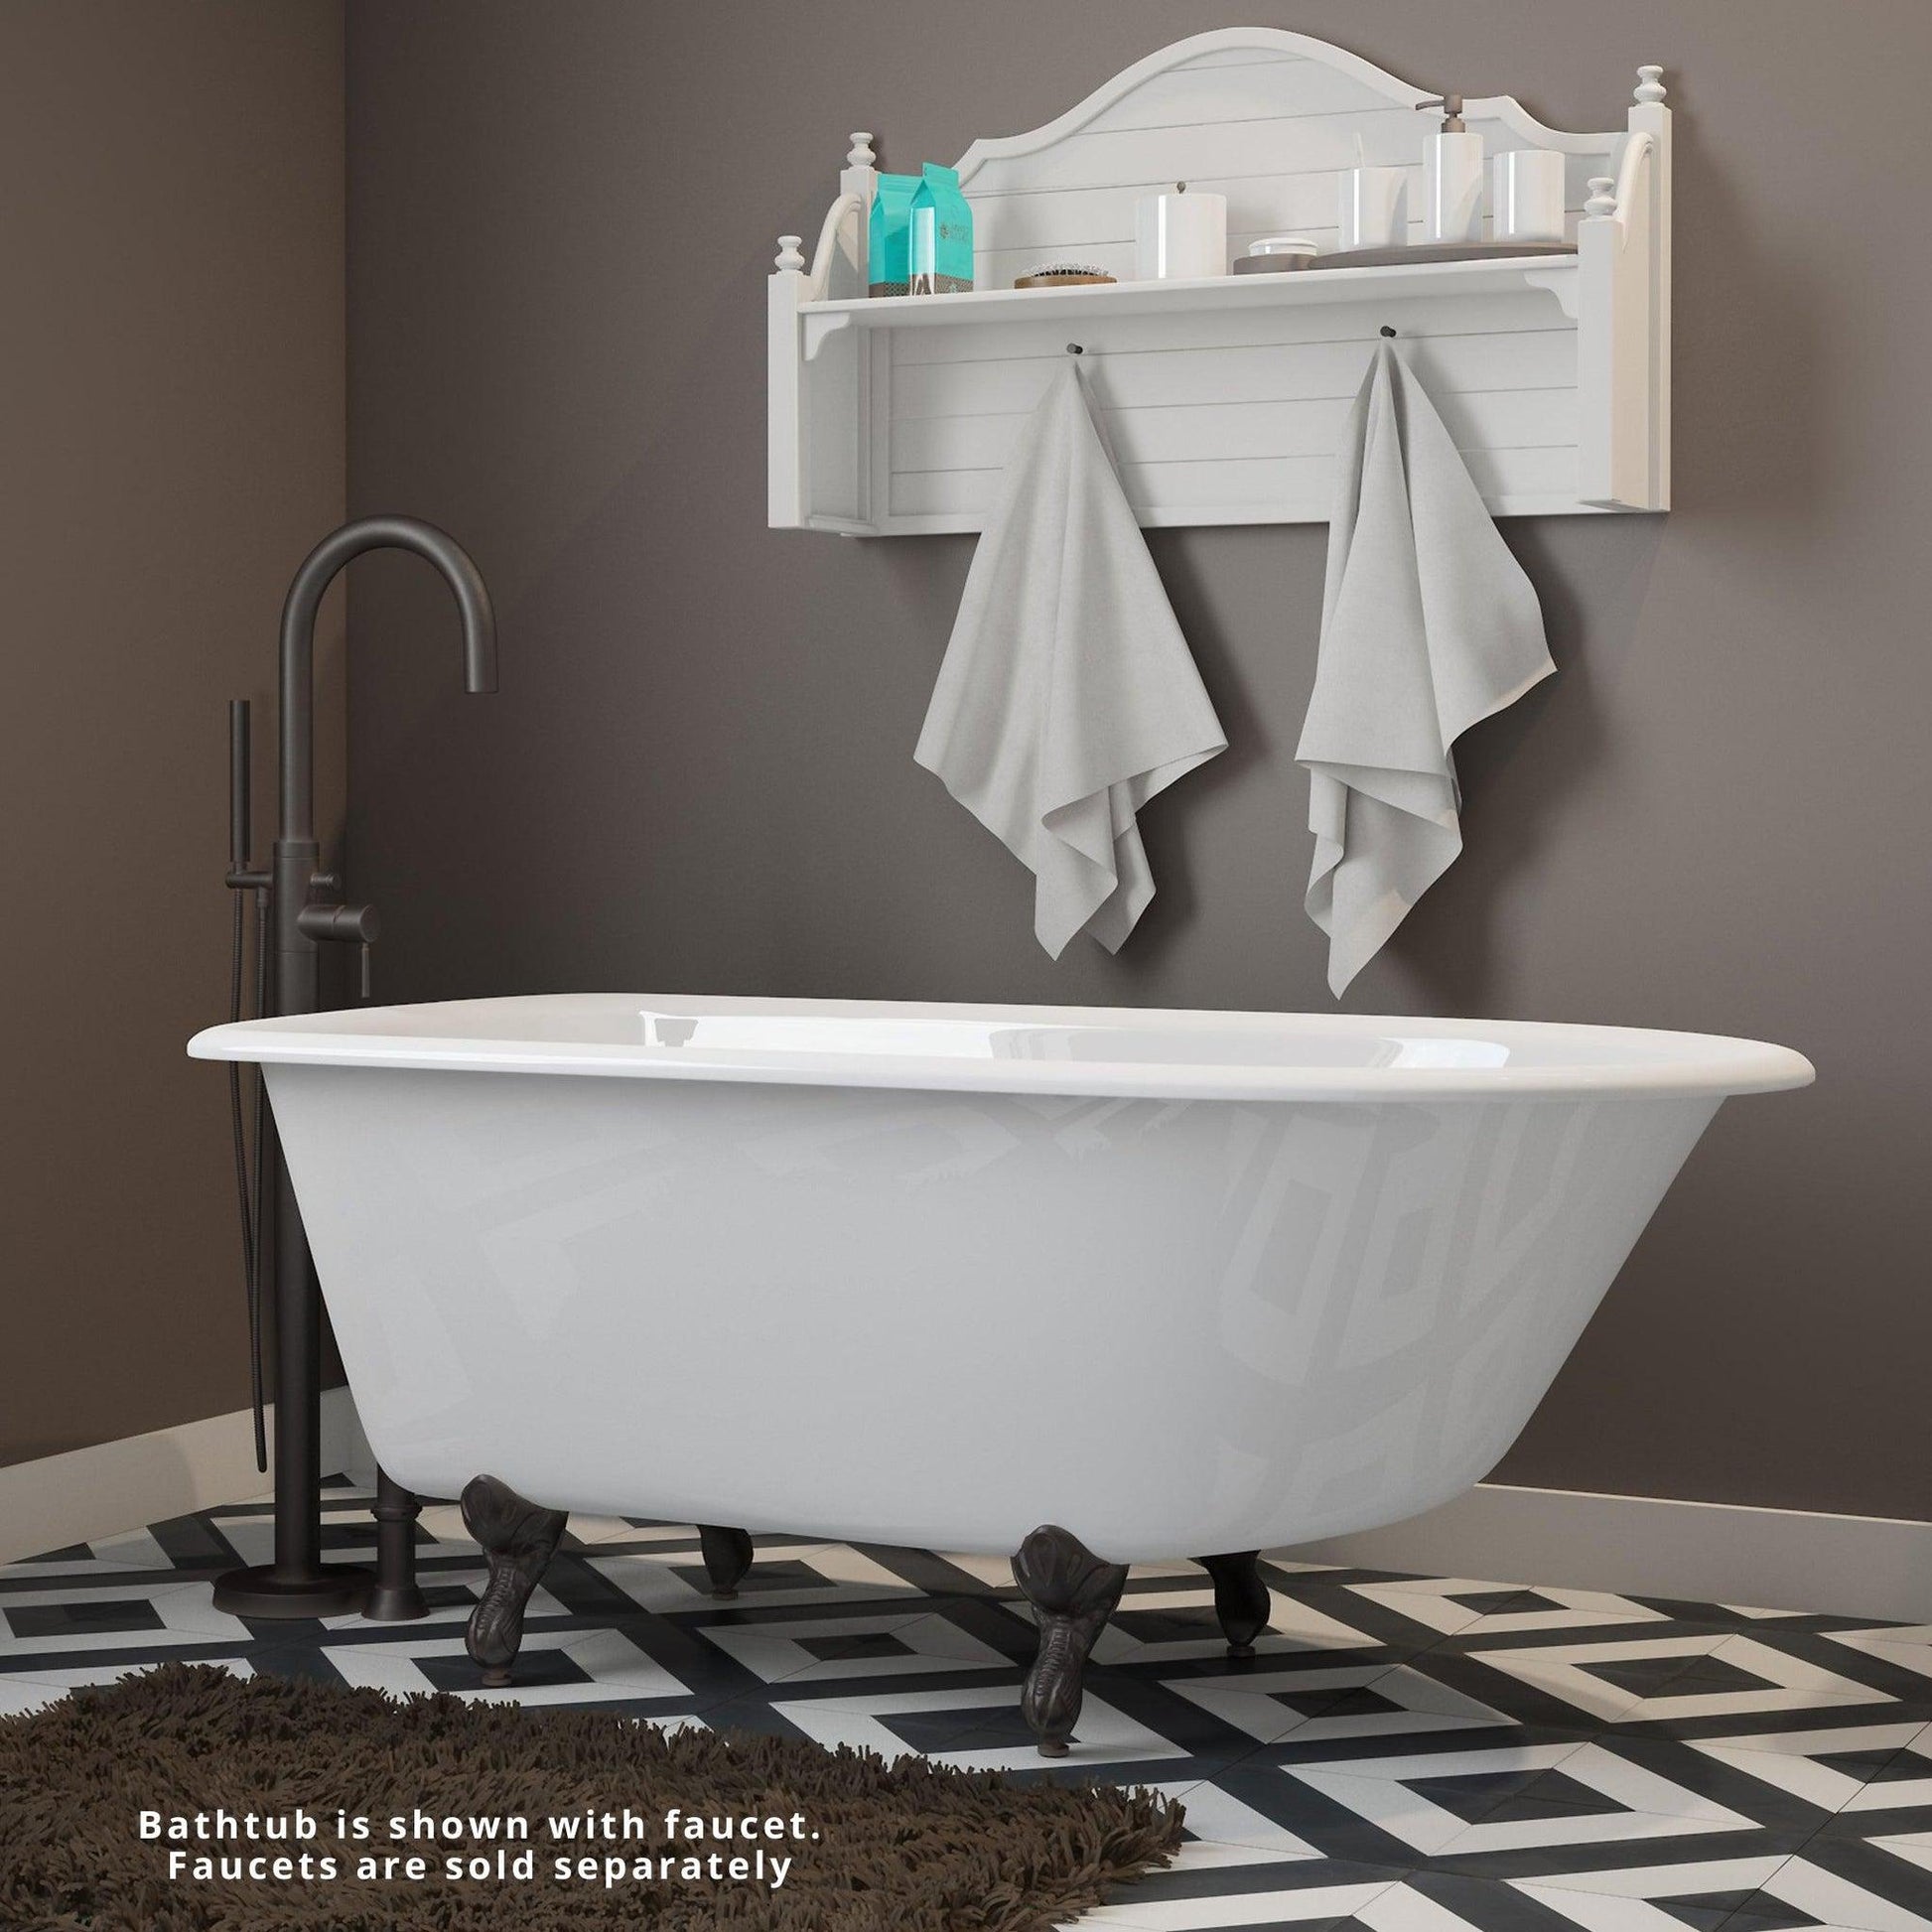 Cambridge Plumbing 60" White Cast Iron Rolled Rim Clawfoot Bathtub With No Faucet Holes With Oil Rubbed Bronze Feet